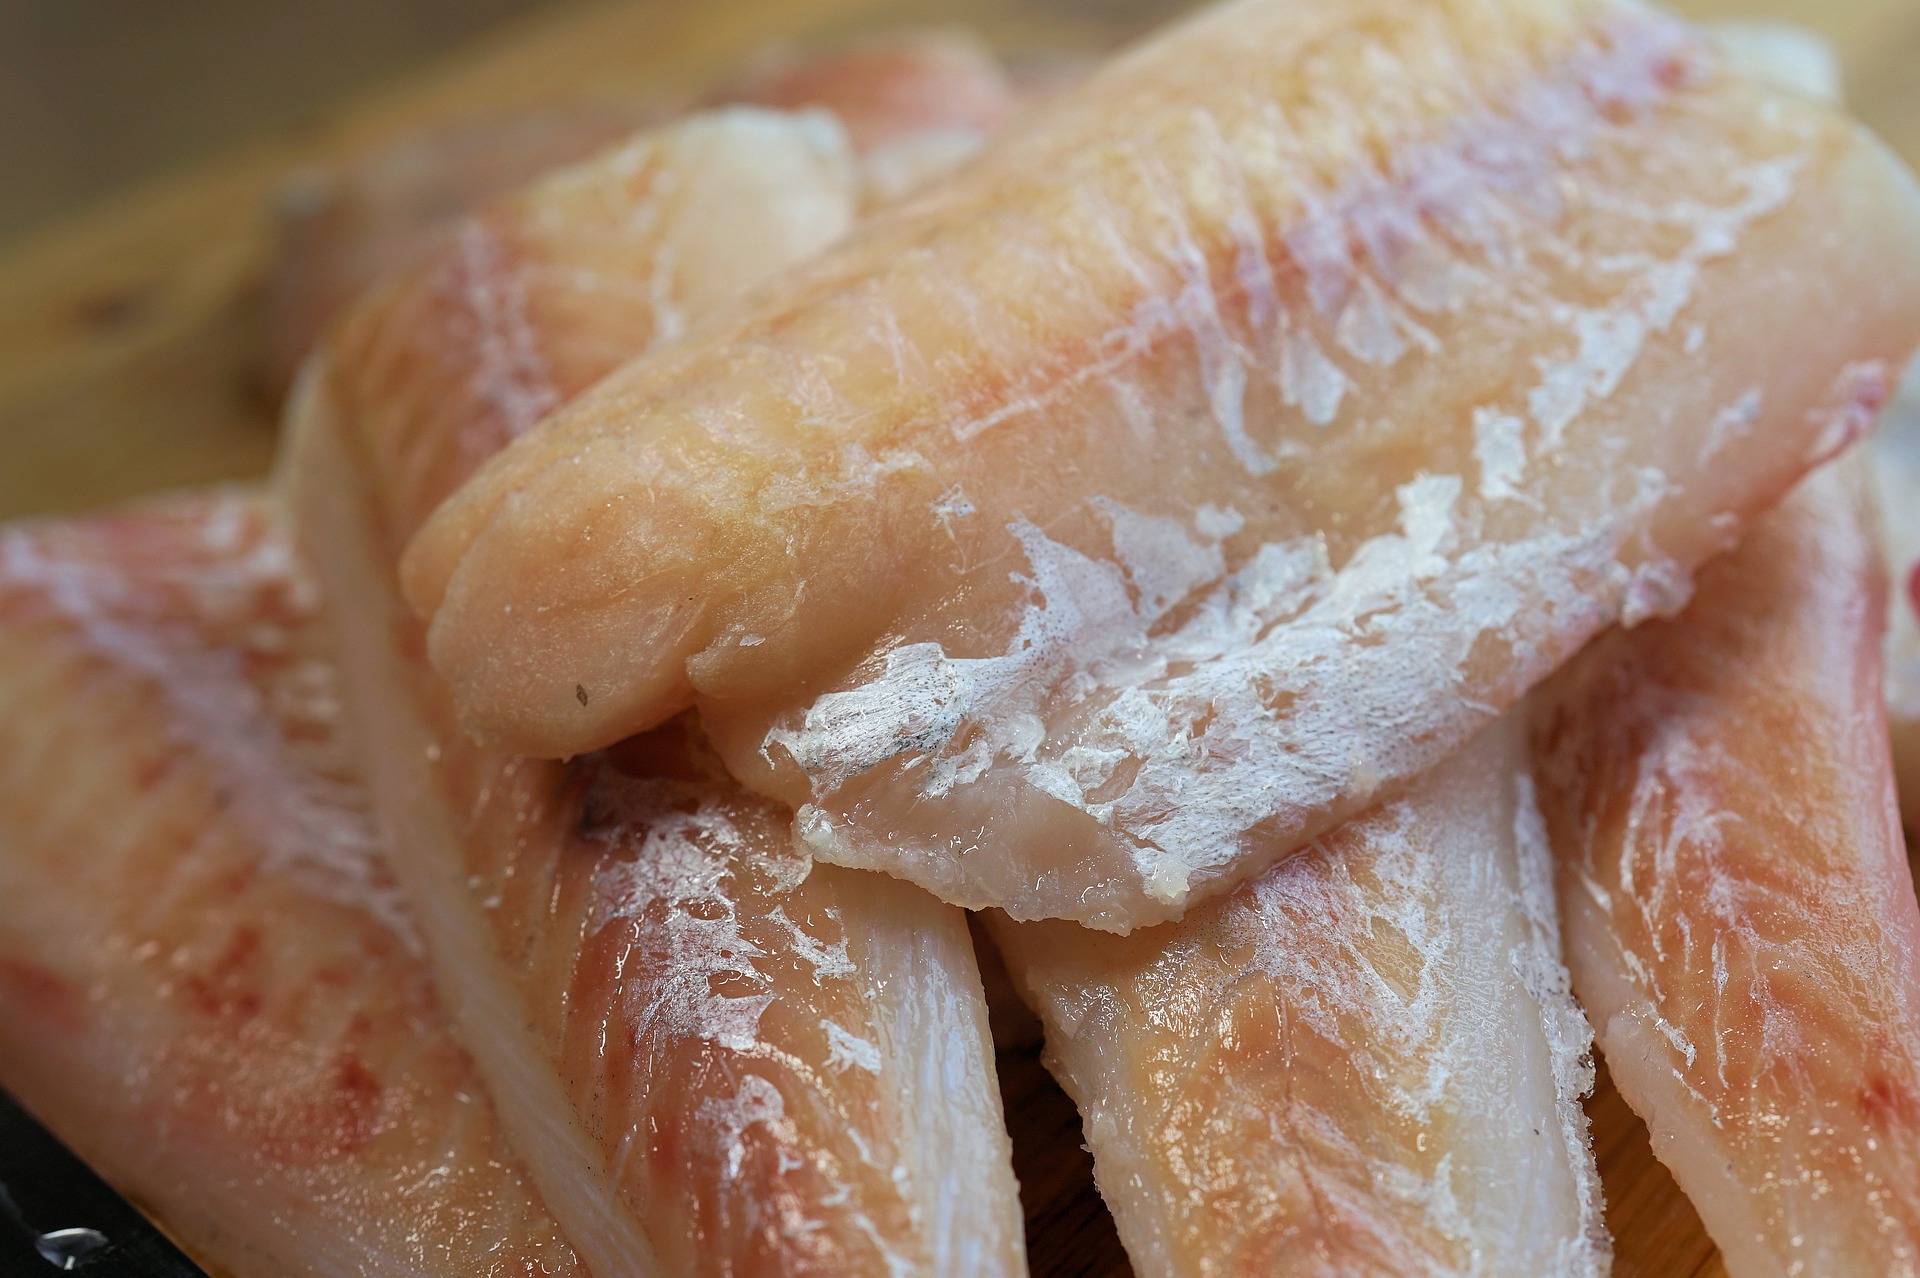 Raw freshly cleaned fish fillets